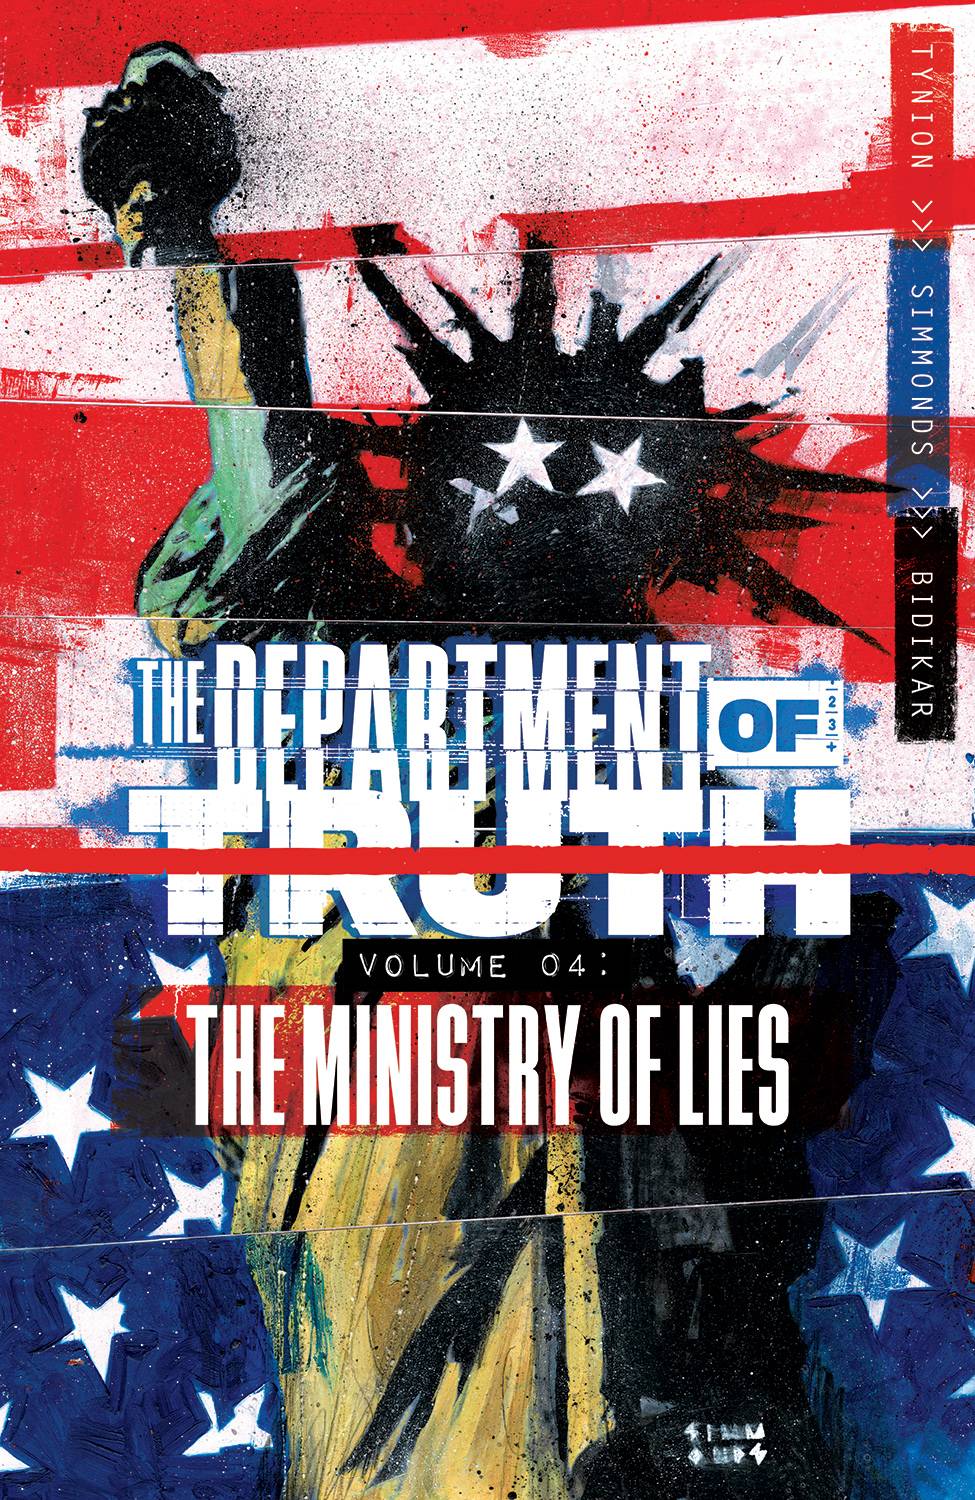 DEPARTMENT OF TRUTH TP VOL 04 (AUG220129) (MR)